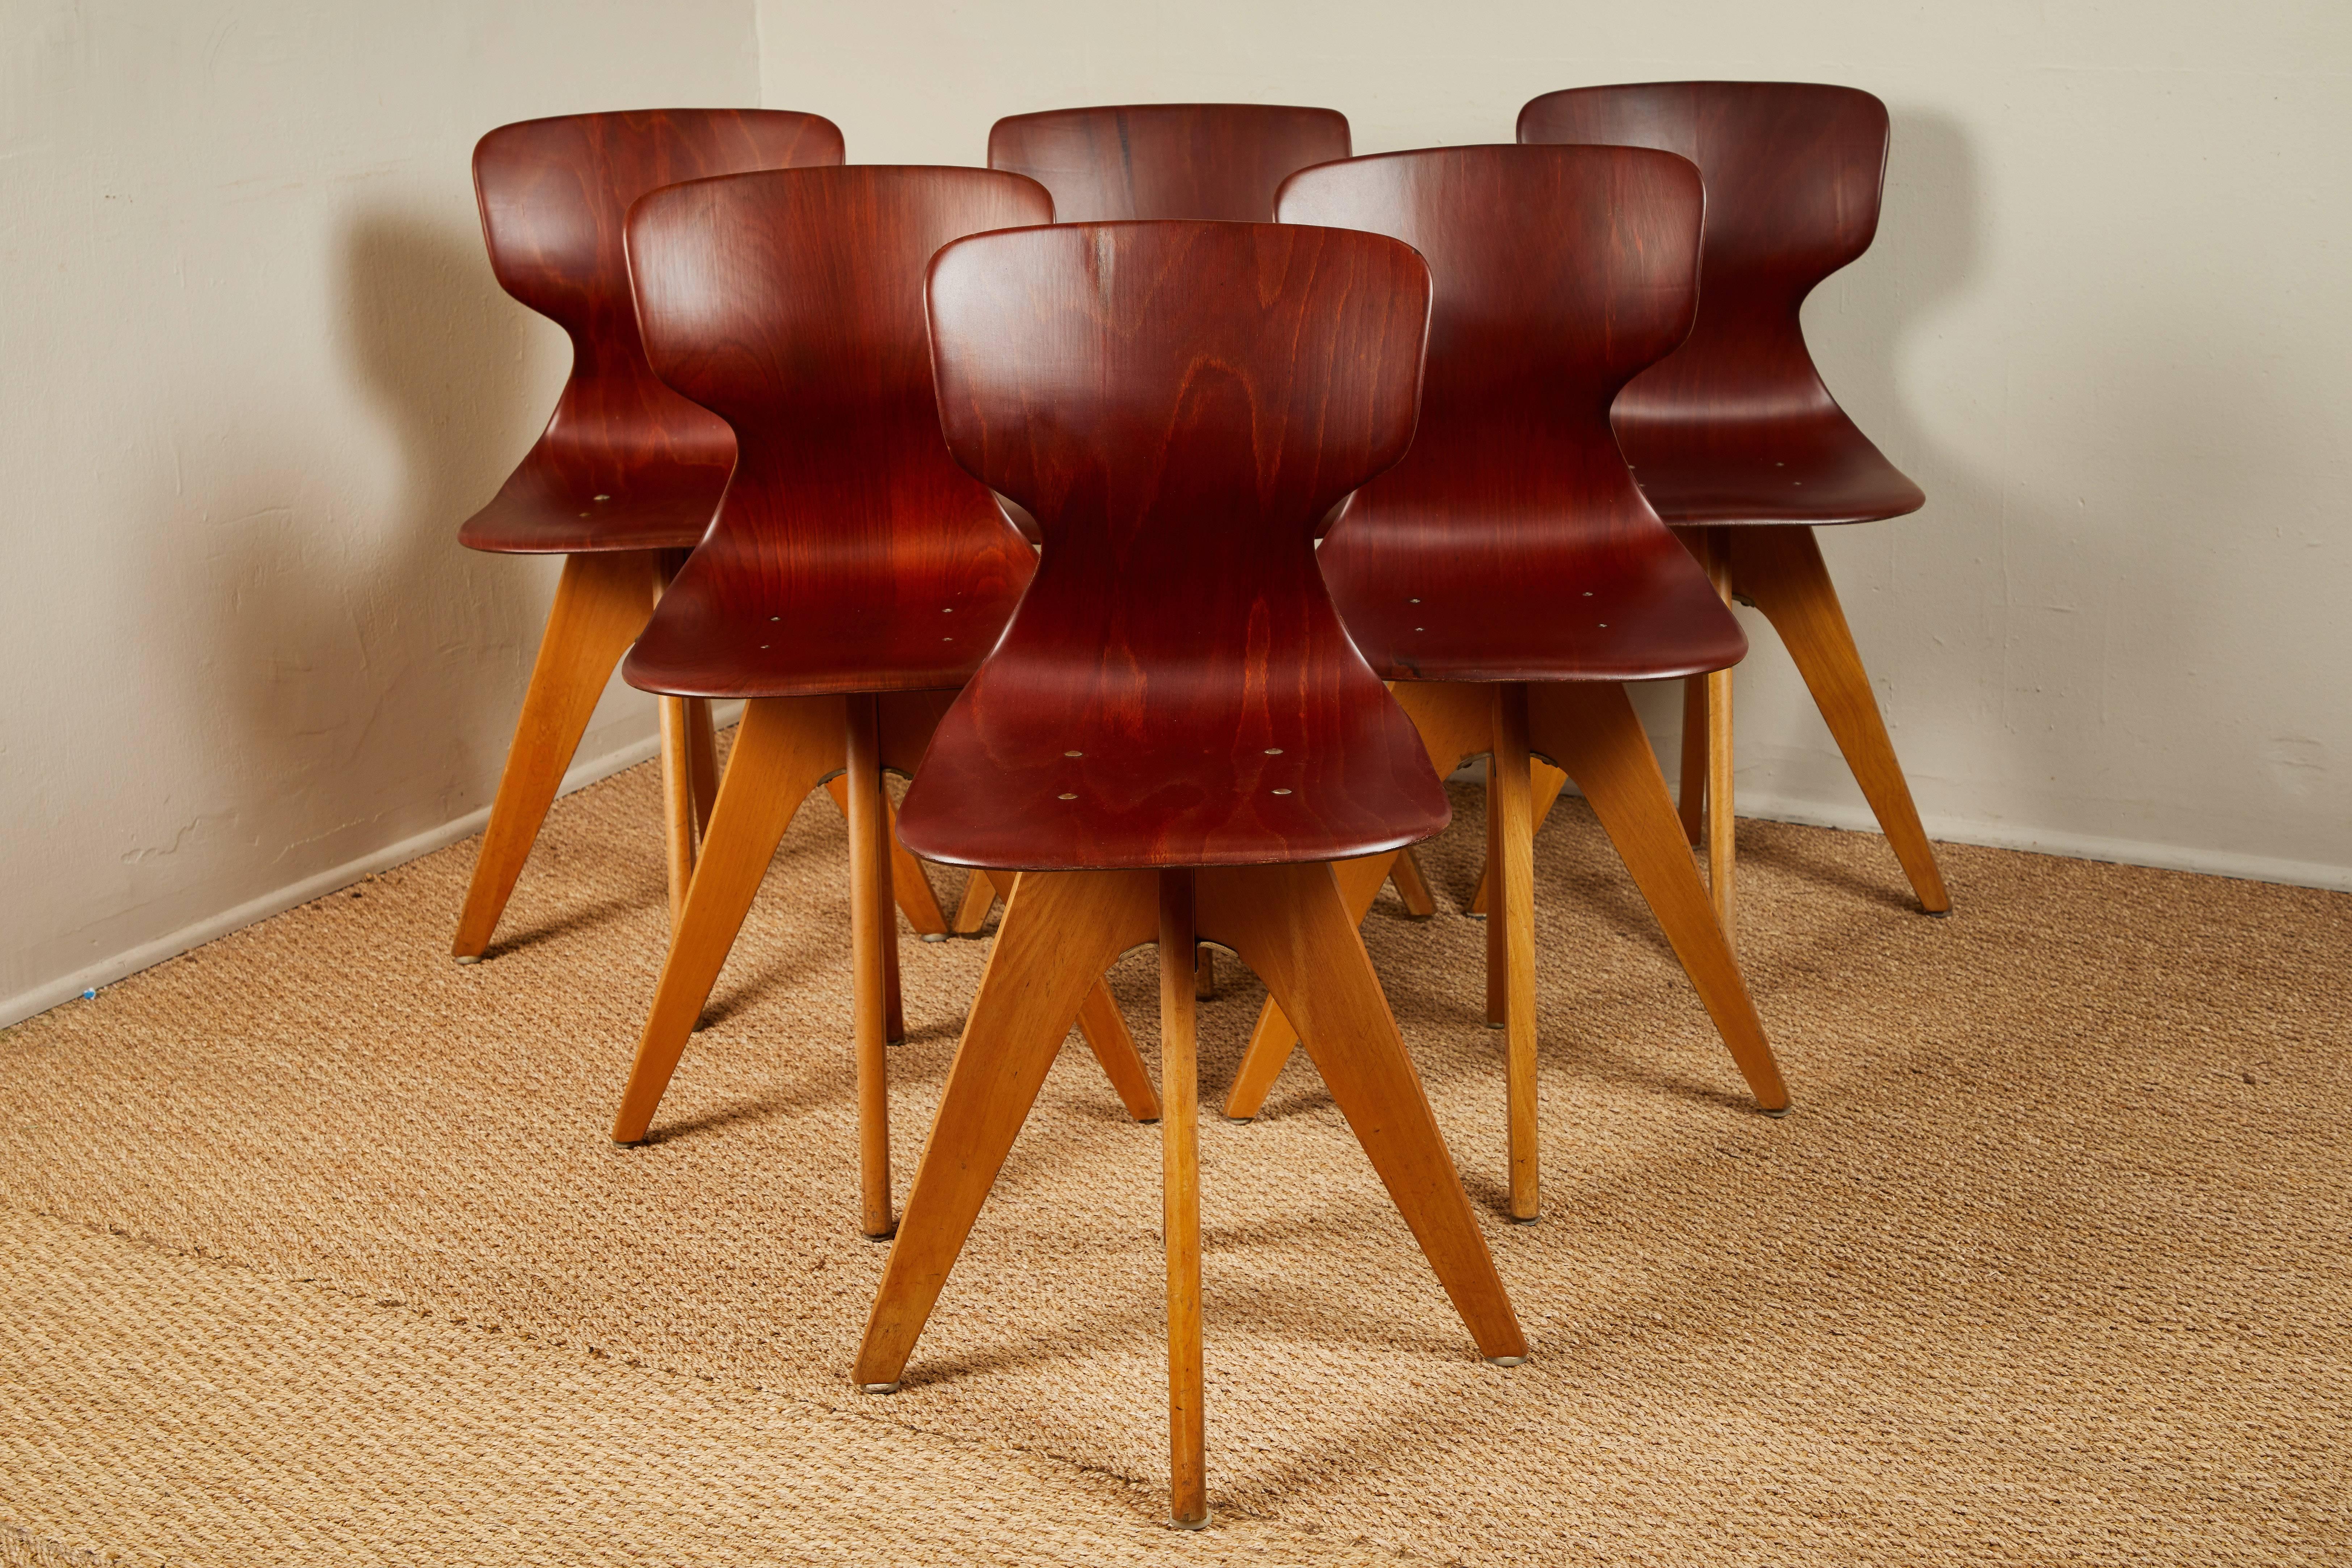 Six molded wood chairs. Used in German schools and universities midcentury. They have a comfortable lumbar curve. Show a little wear and some are slightly different. See images 4 and 5.  Sold individually.
 